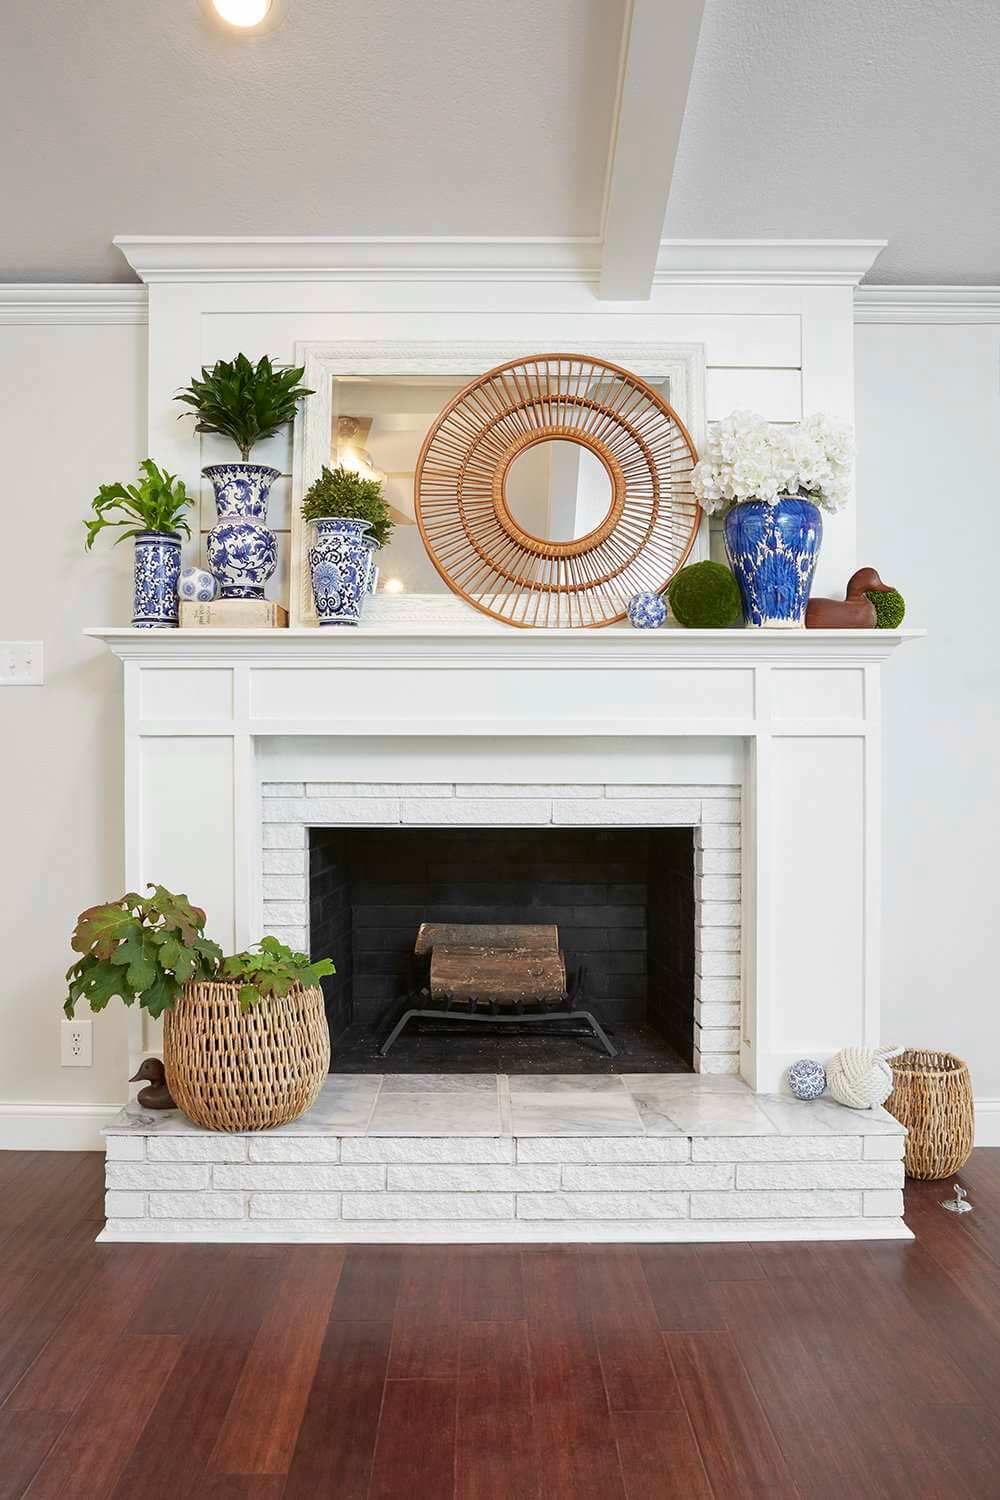 A living room with a white  fire place and potted plants

